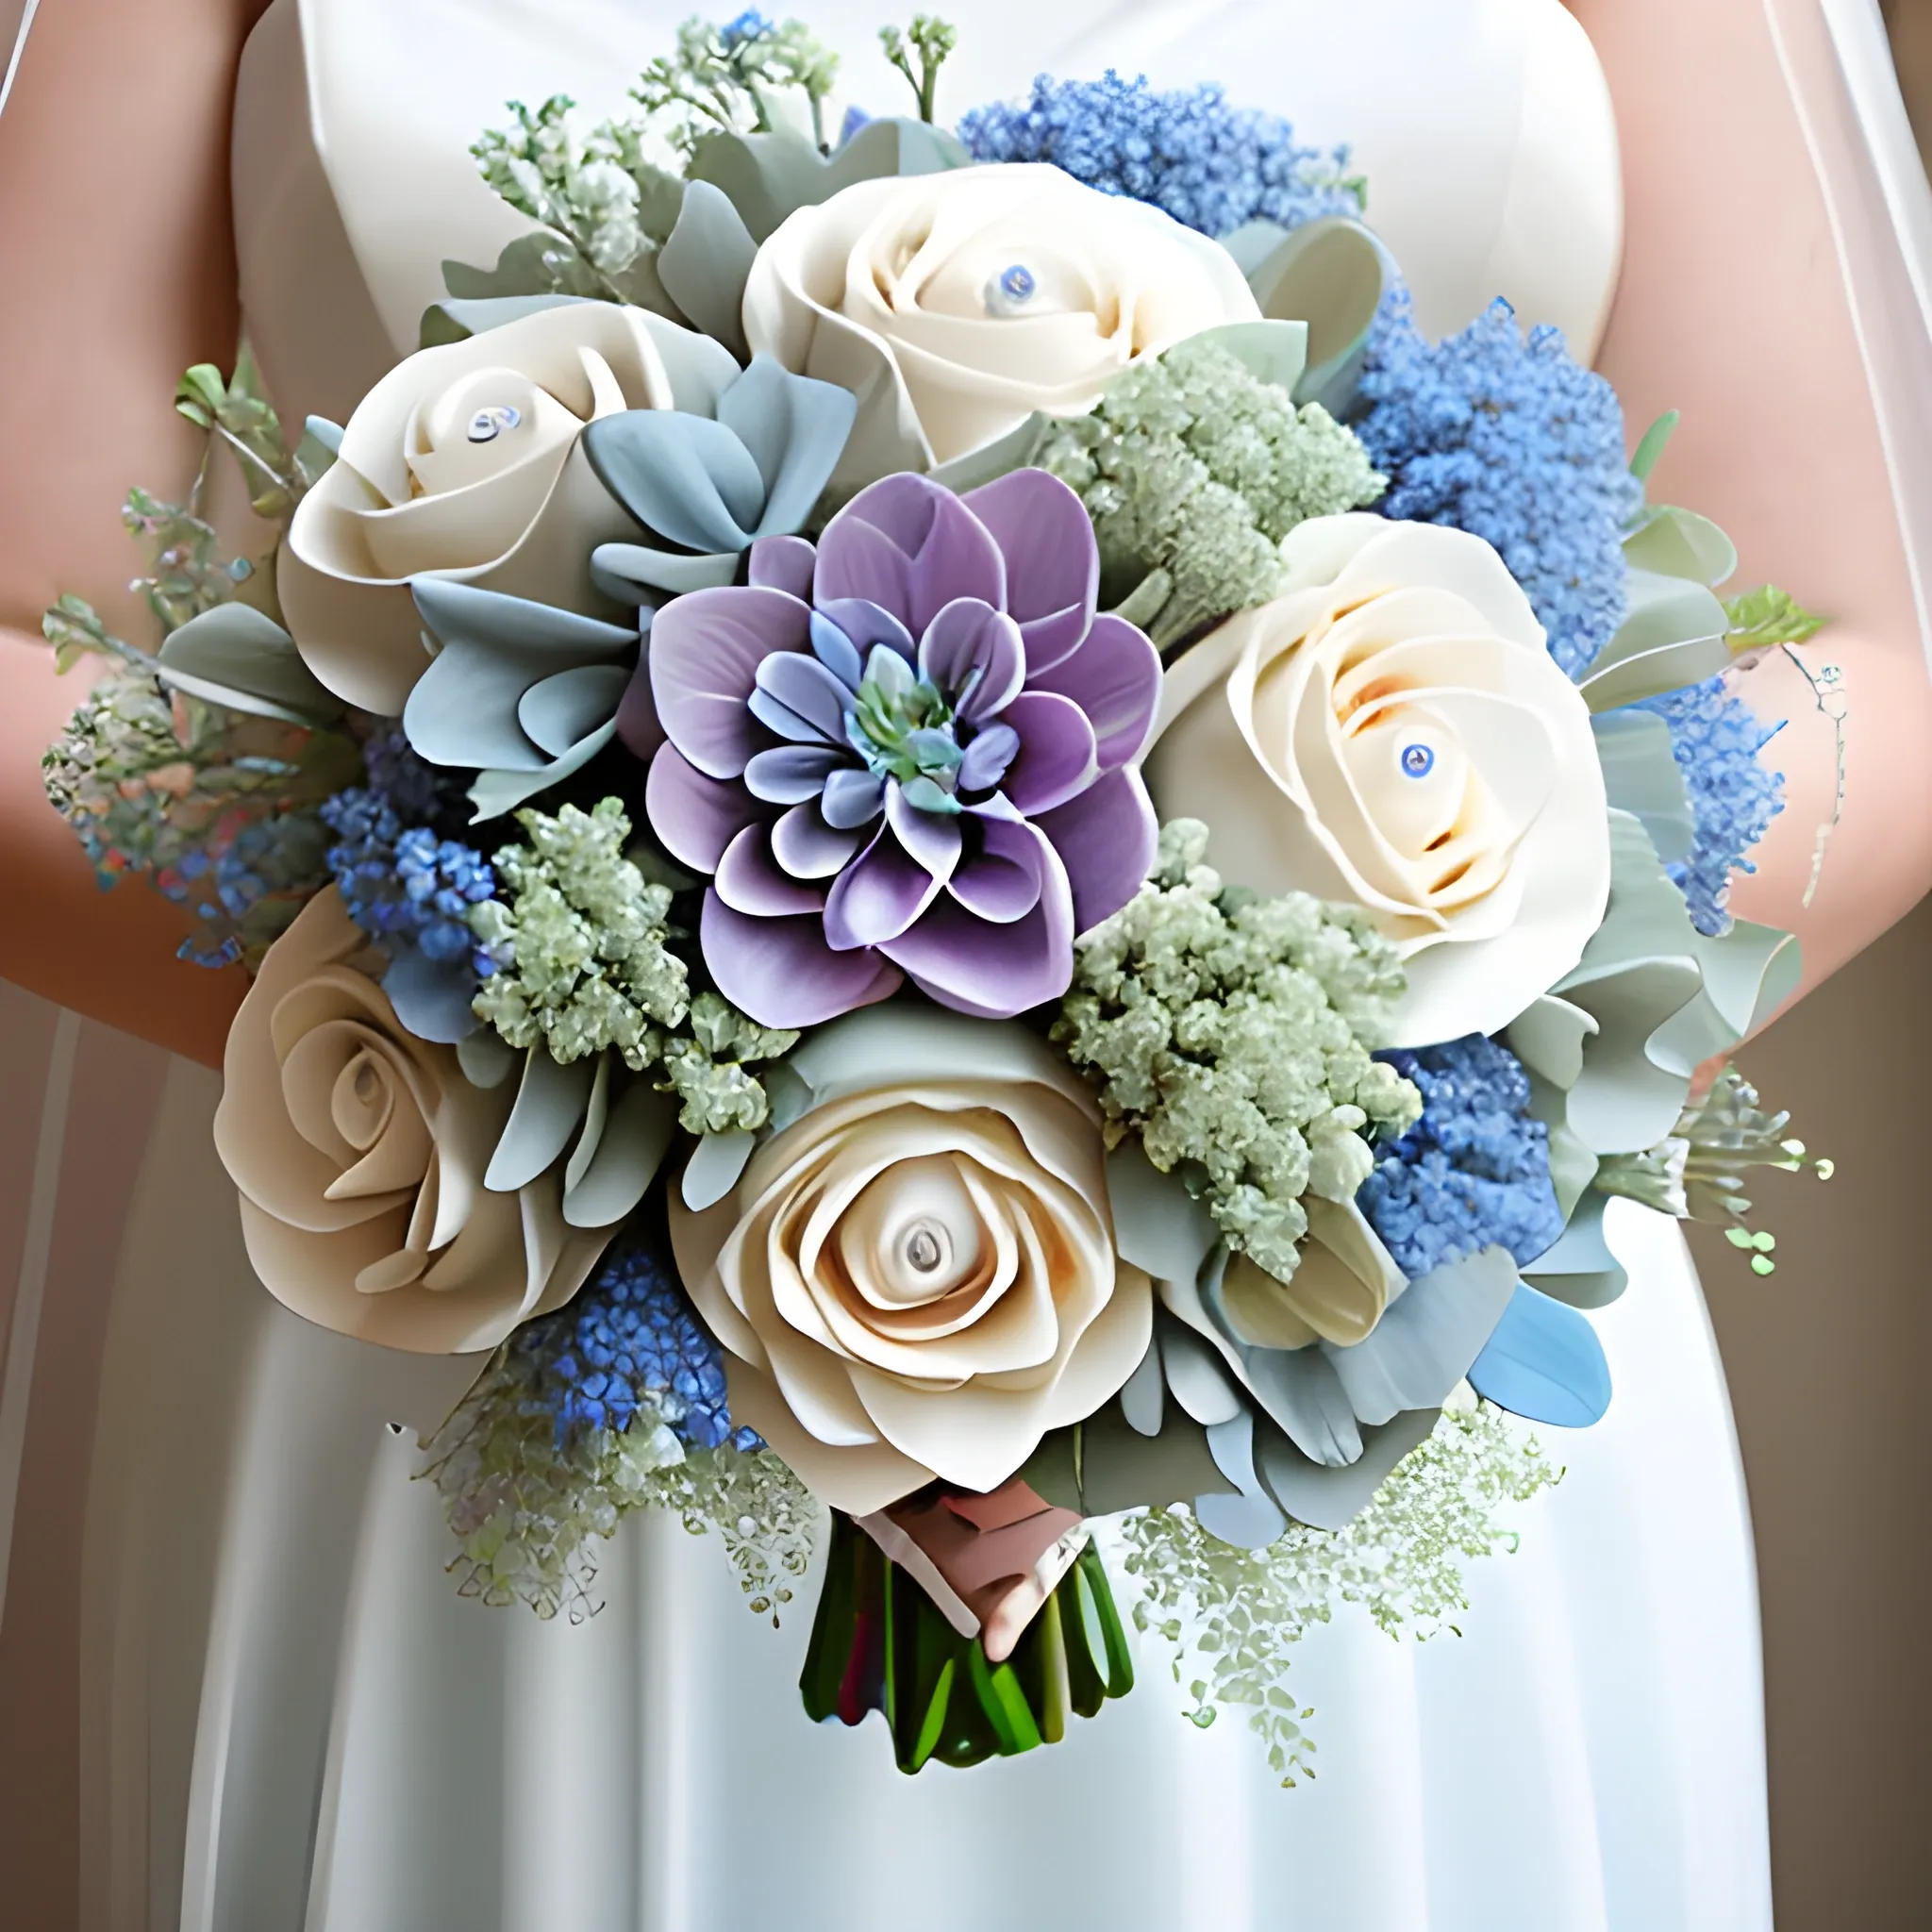 hyper realistic photo wedding bride's and bridesmaid's bouquets with dusty miller, terracotta roses, light blue delphinium, and ivory dahlias